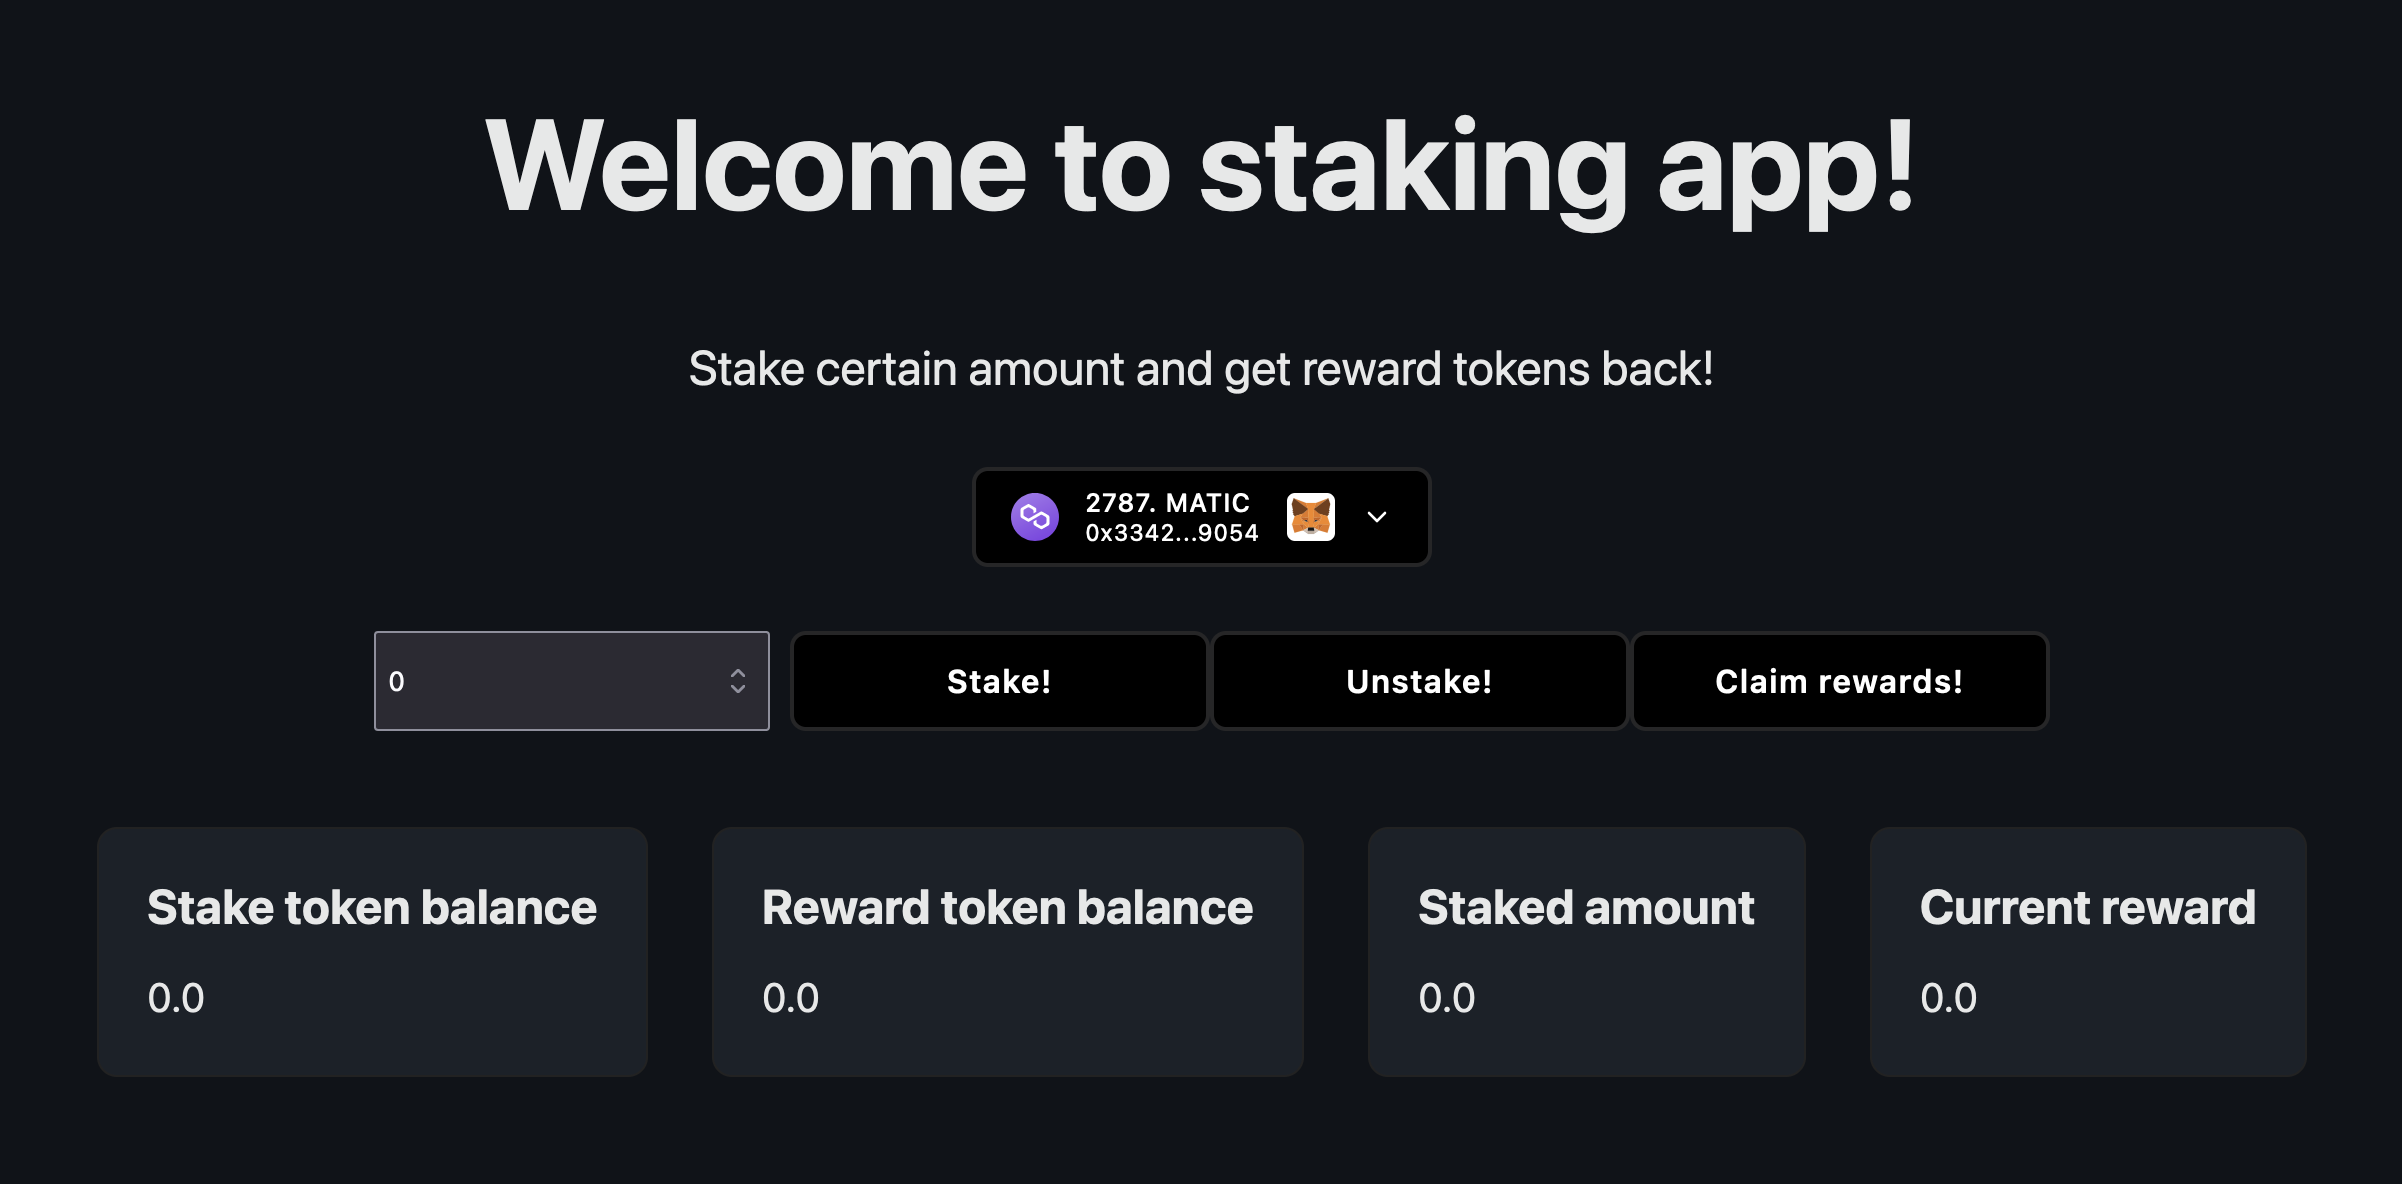 Staking app running on browser